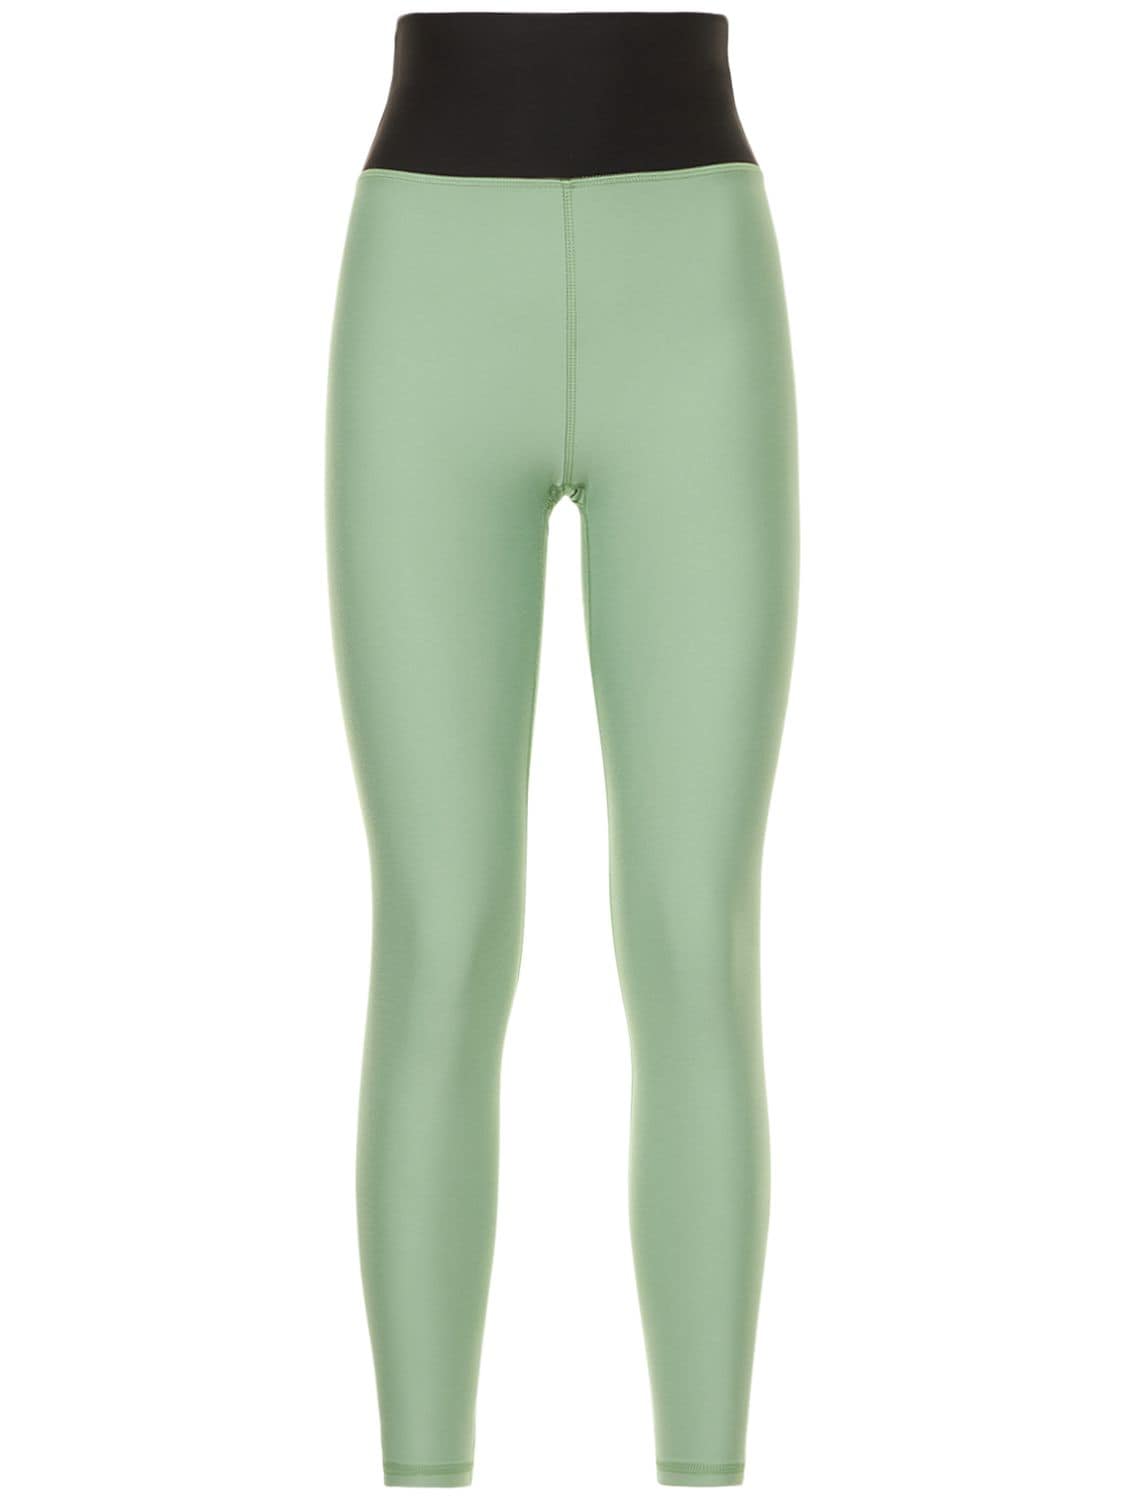 WEWOREWHAT High Rise Stretch Tech 7/8 Leggings